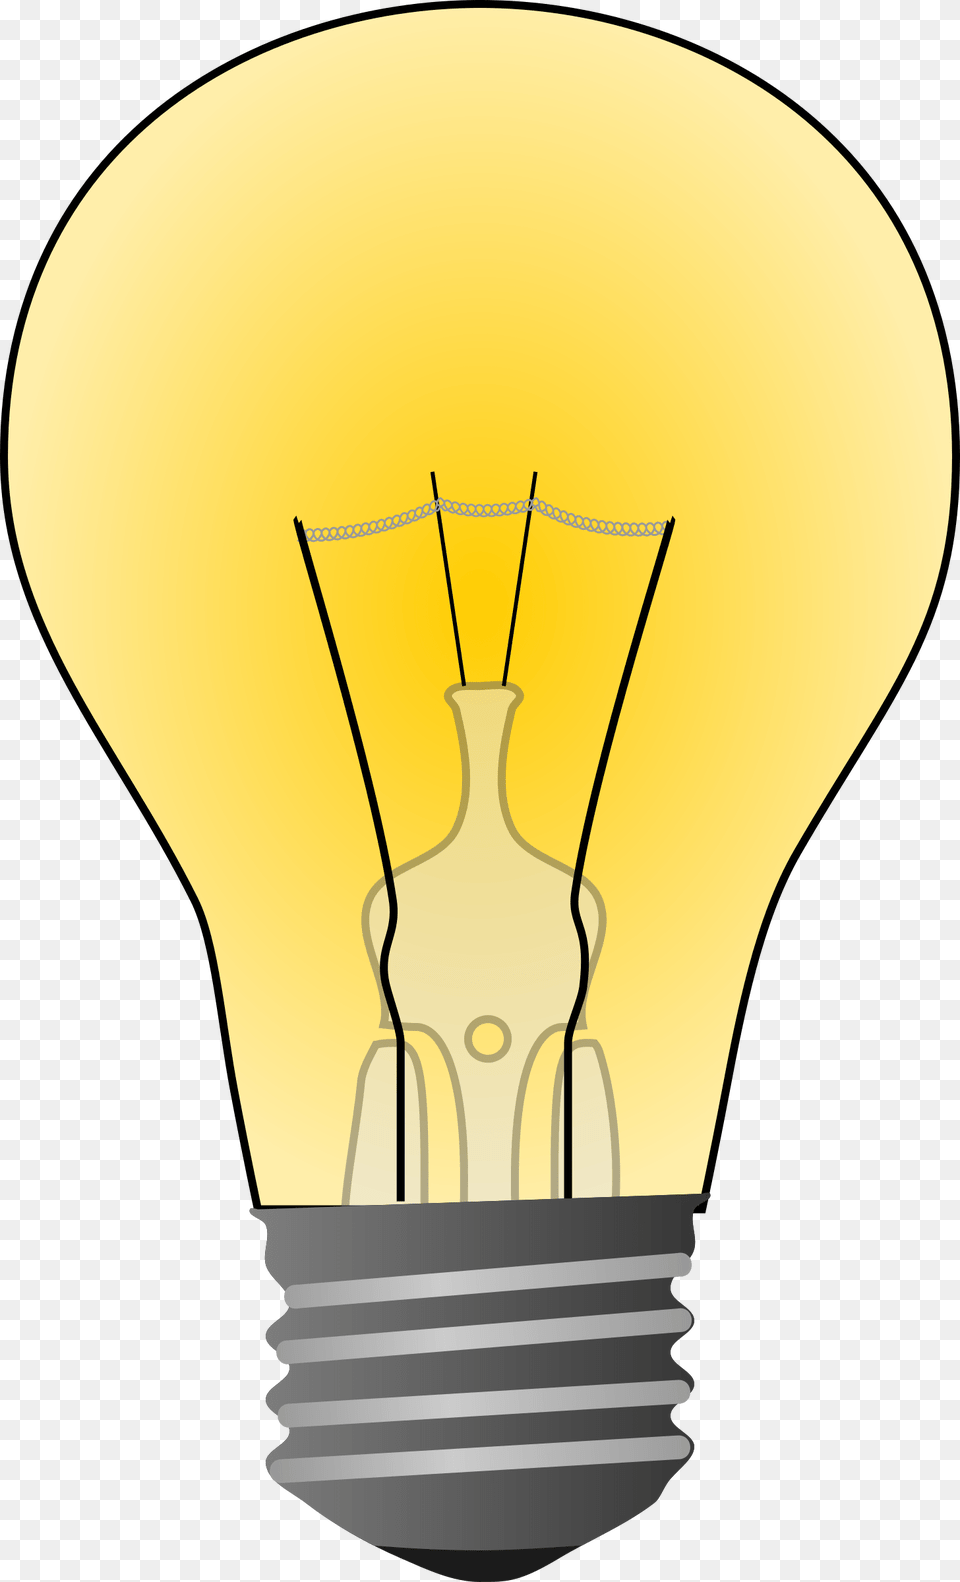 Finest Collection Of To Use Light Bulb Clipart Light Bulb, Lightbulb Png